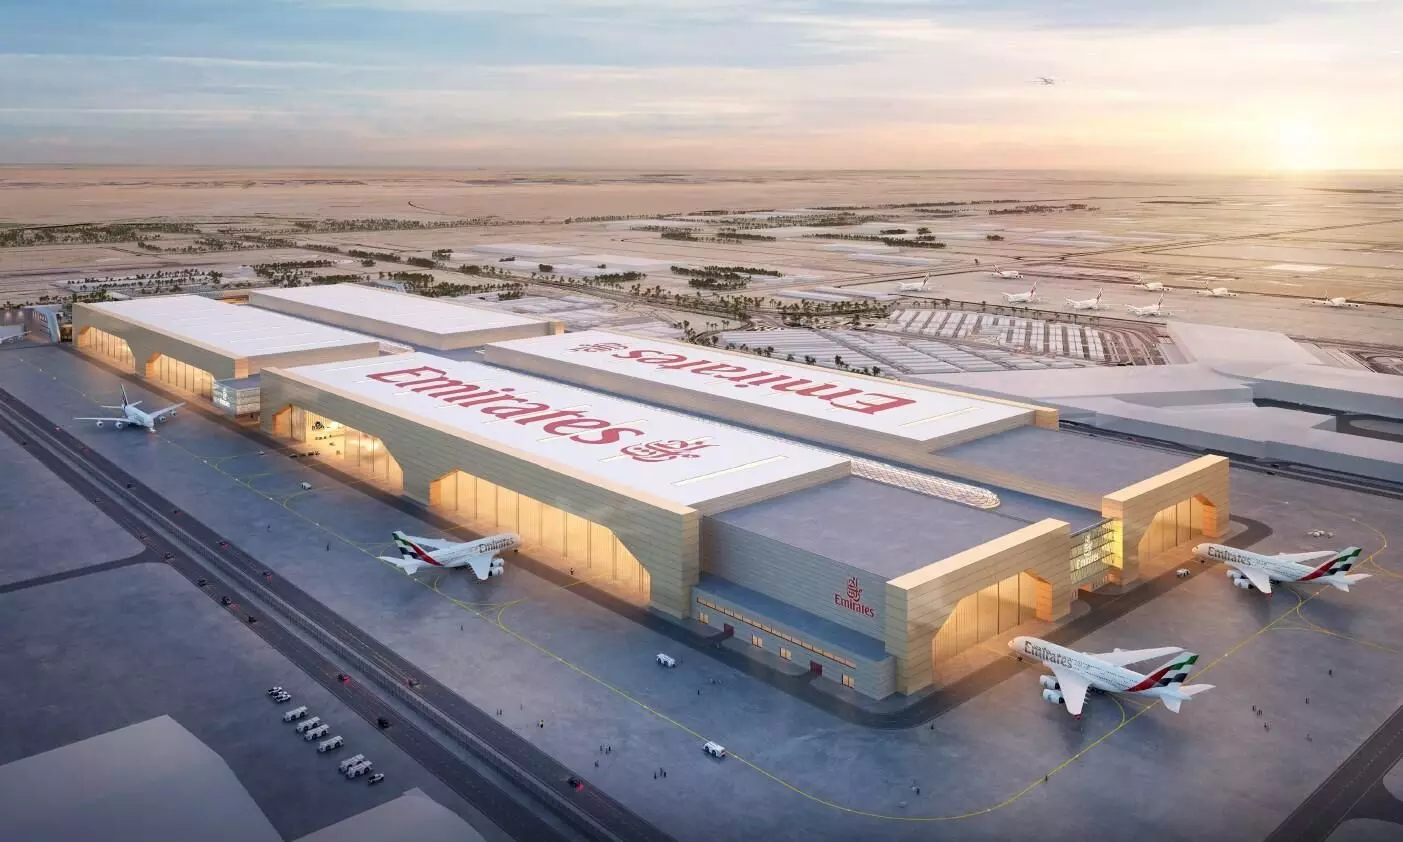 Emirates to build $950 million engineering facility at DWC